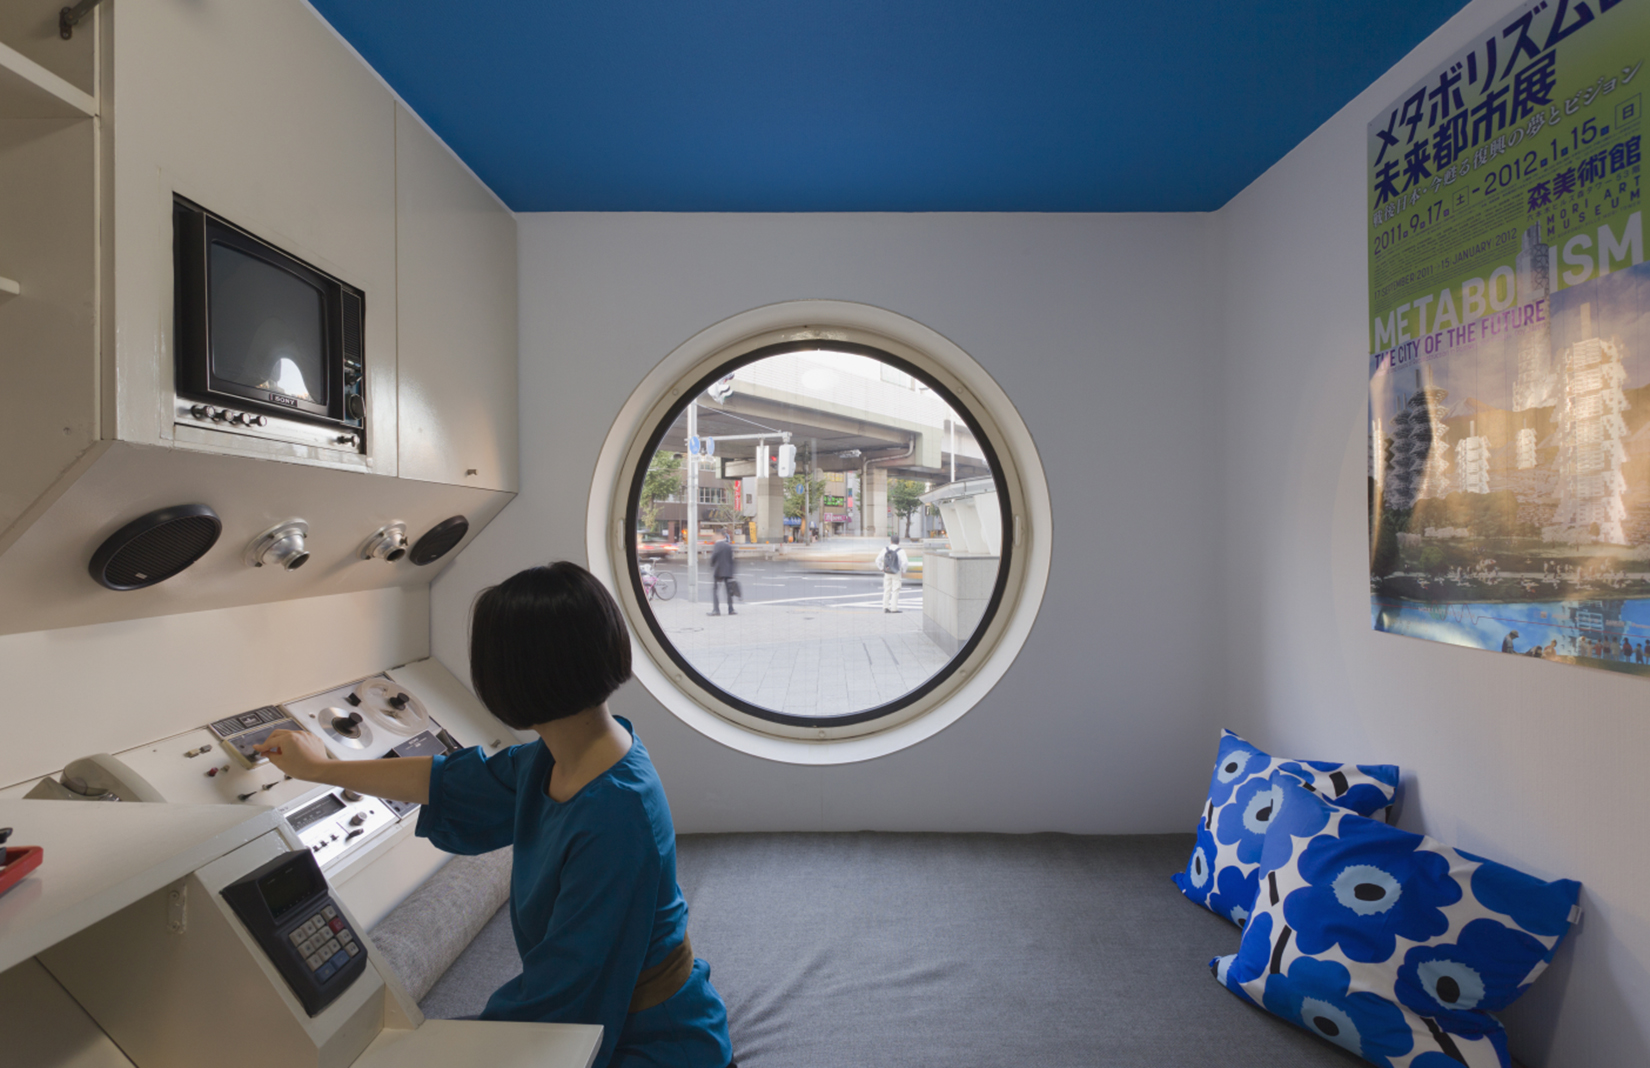 Inside one of the units at the Nakagin Capsule Tower Photography: Mori Art Museum